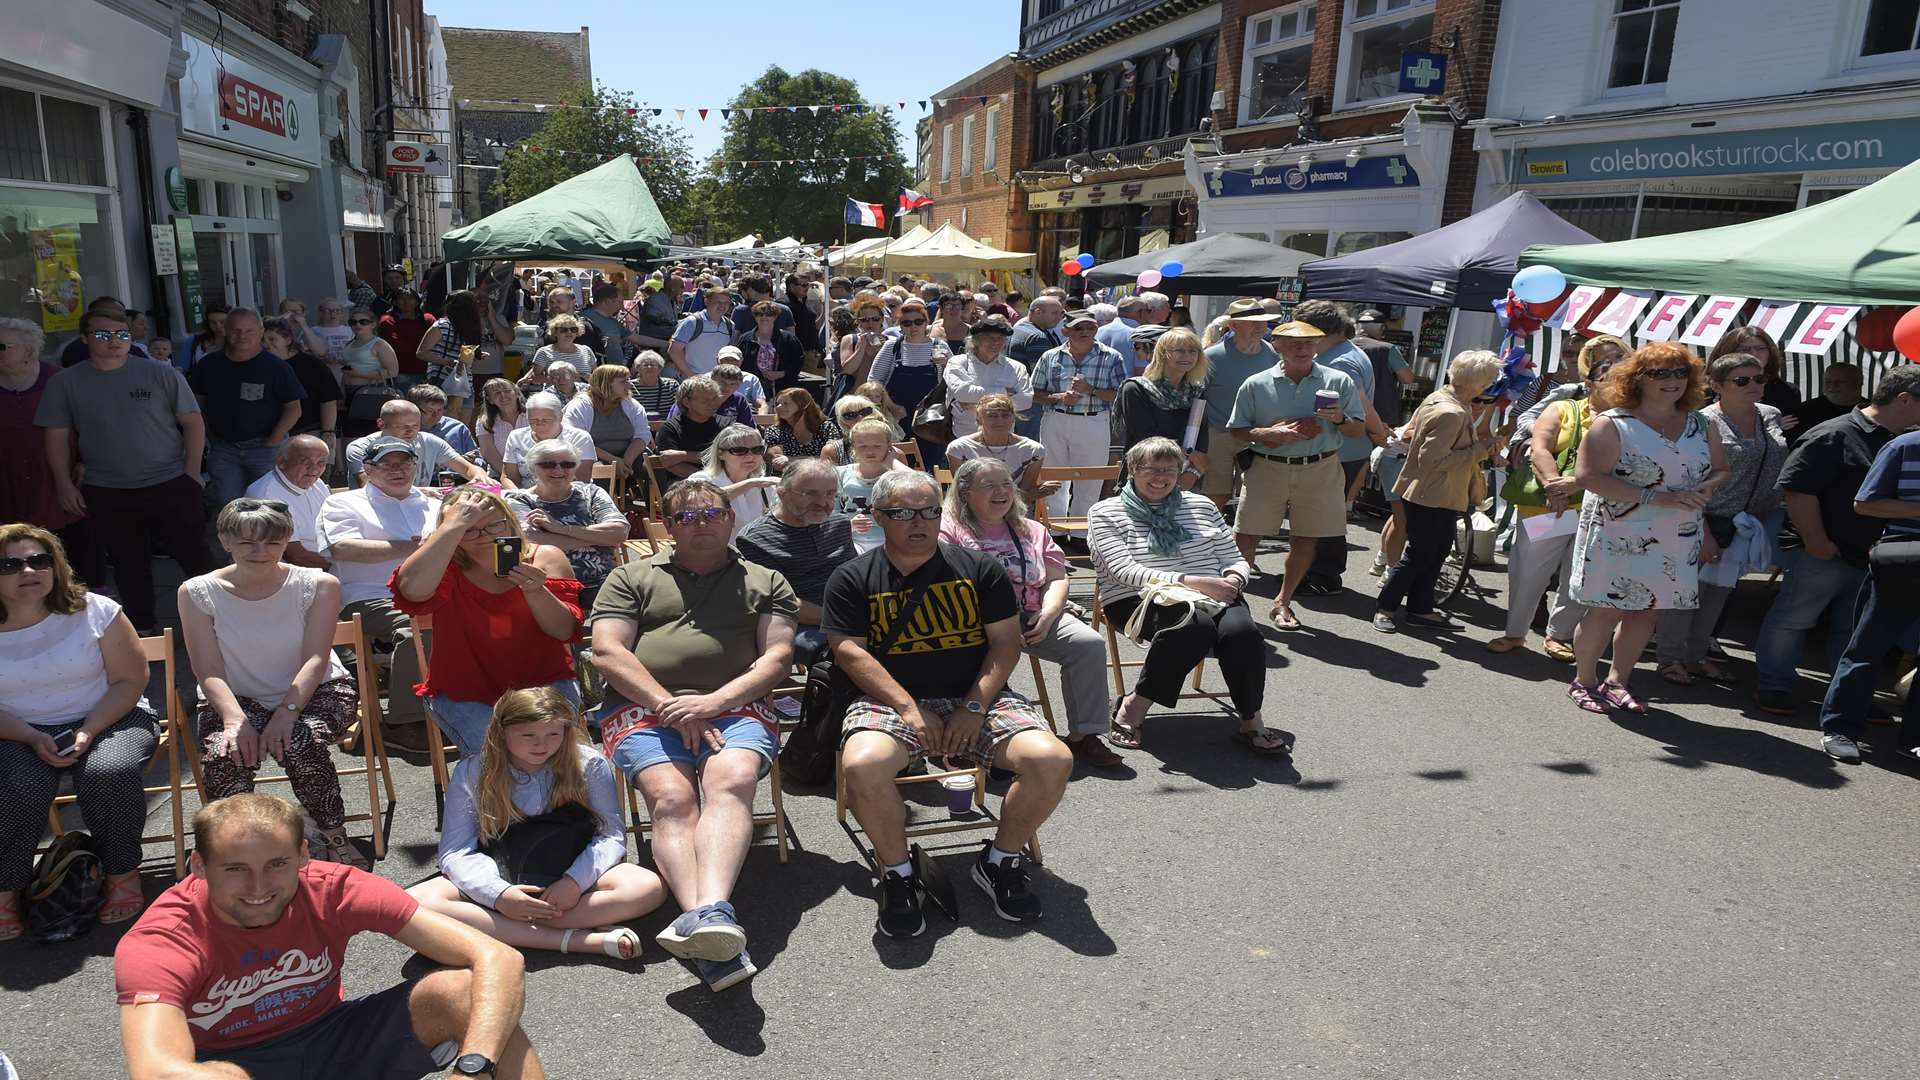 Crowds enjoy the music at Le Weekend in Sandwich